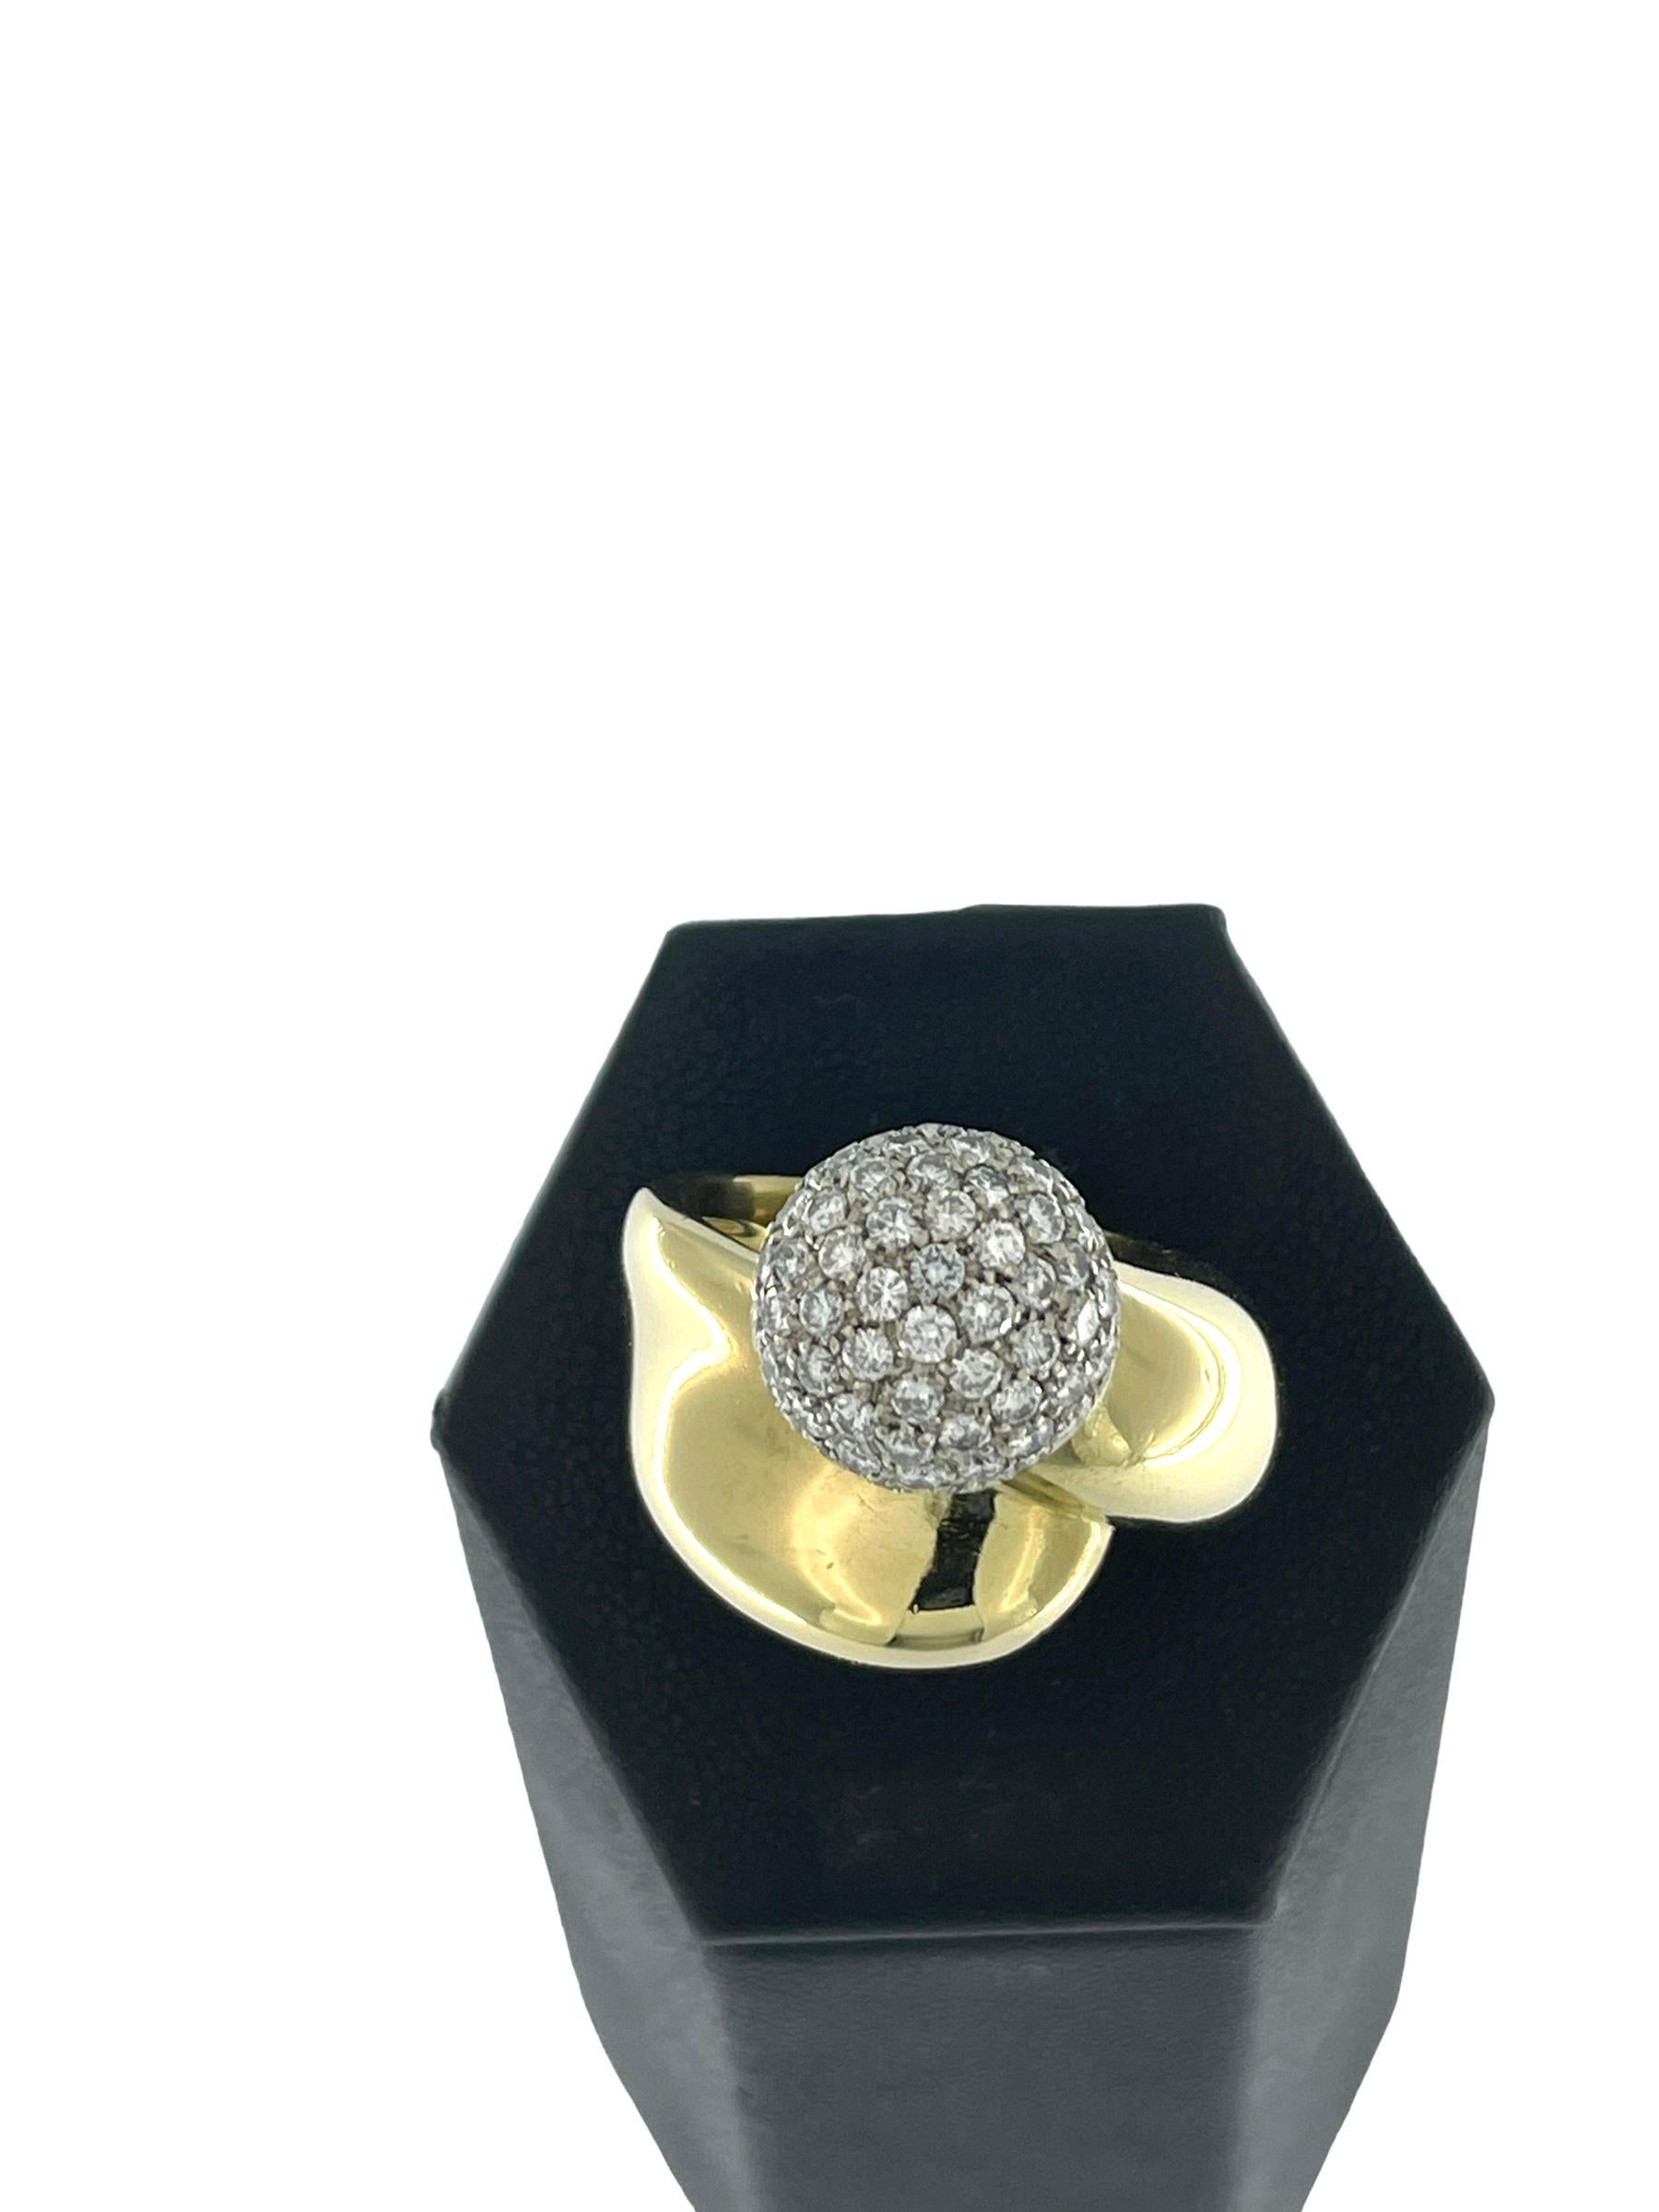 HRD Certified Retro Style Gold Ring with Diamonds For Sale 1